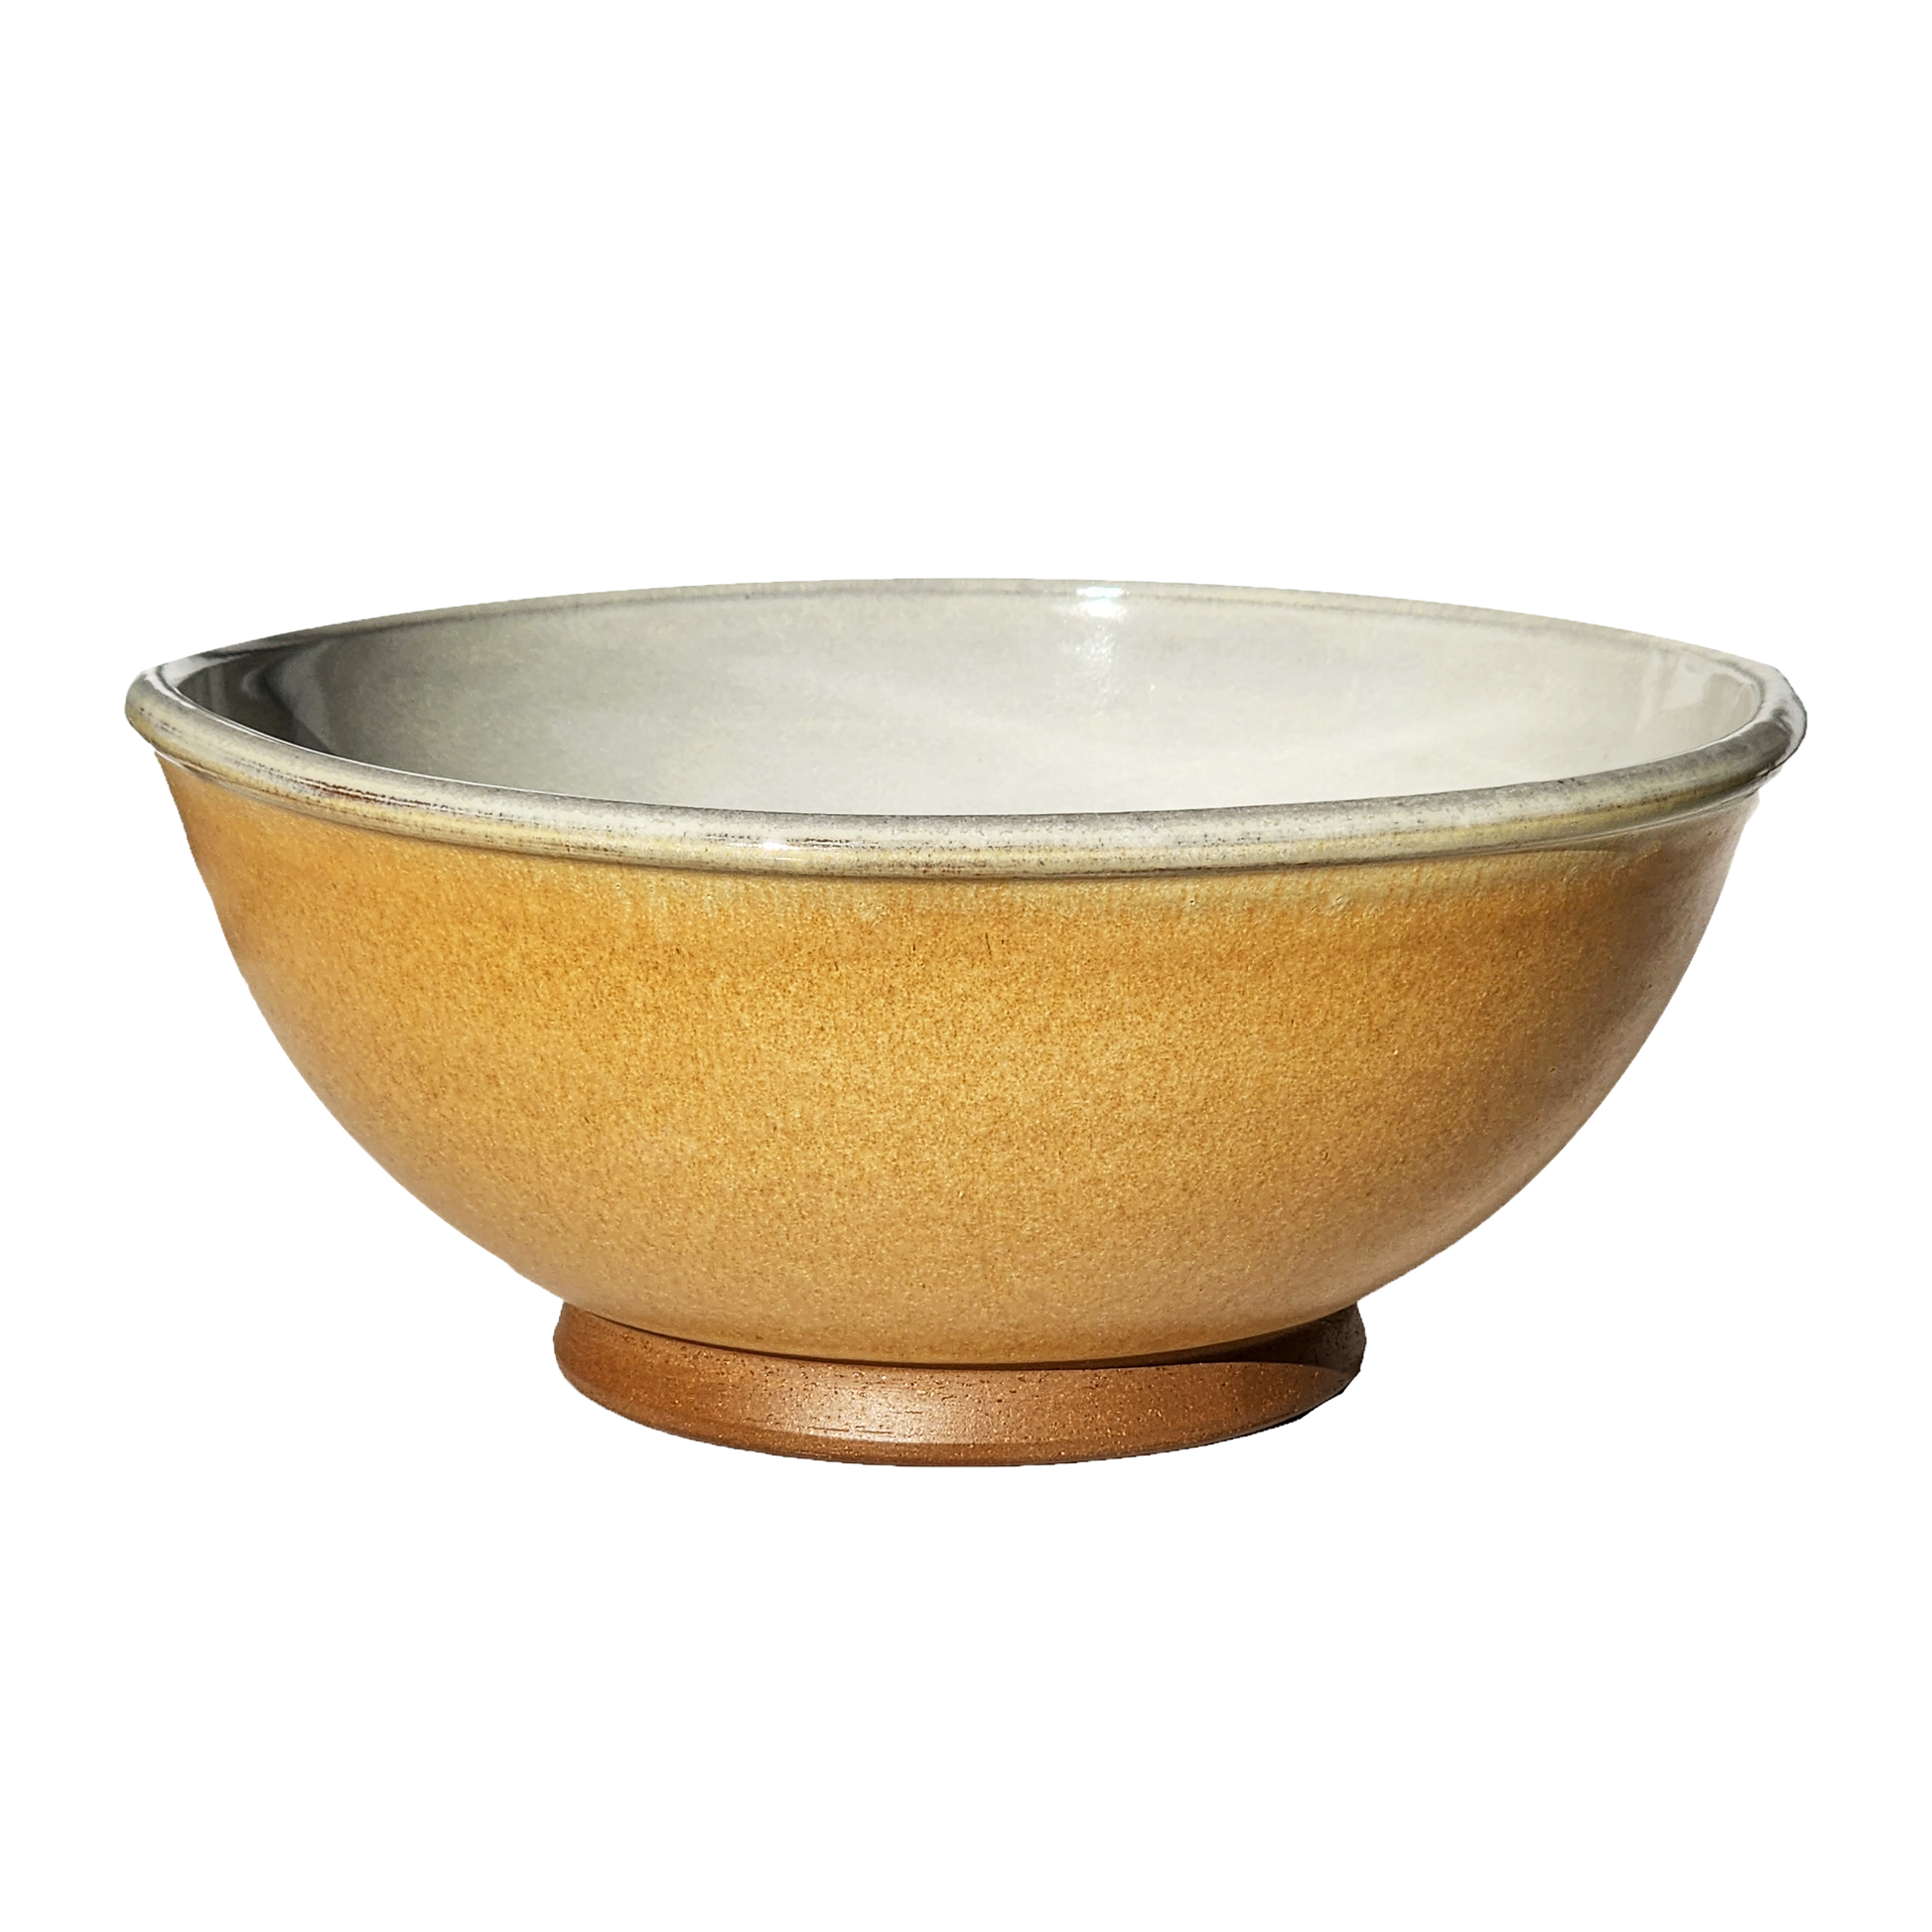 Image: A large mixing bowl in vibrant bumblebee yellow, offering a generous capacity of 12.5 cups. Perfect for mixing ingredients with a sunny pop of color in your kitchen.